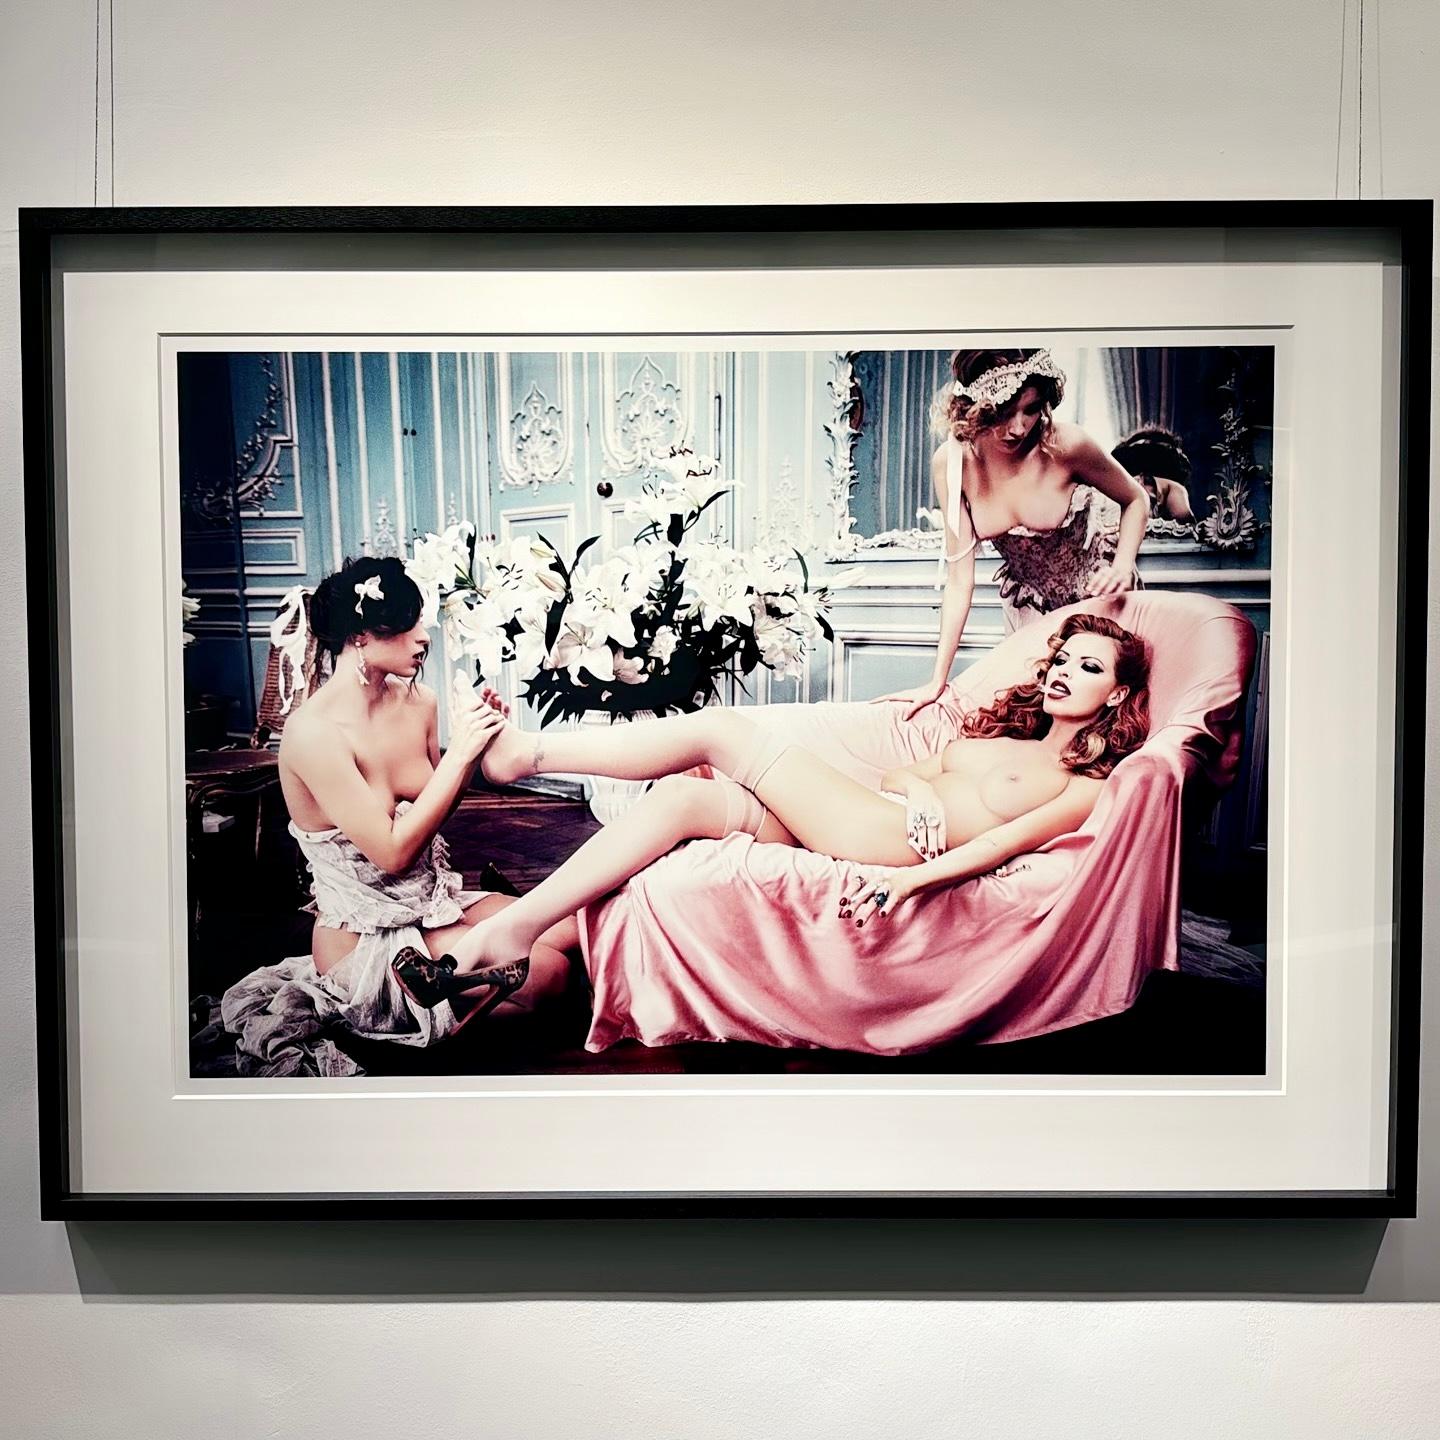 Revival, from the Story of Olga - nude on pink sofa, fine art photography, 2011 - Photograph by Ellen von Unwerth